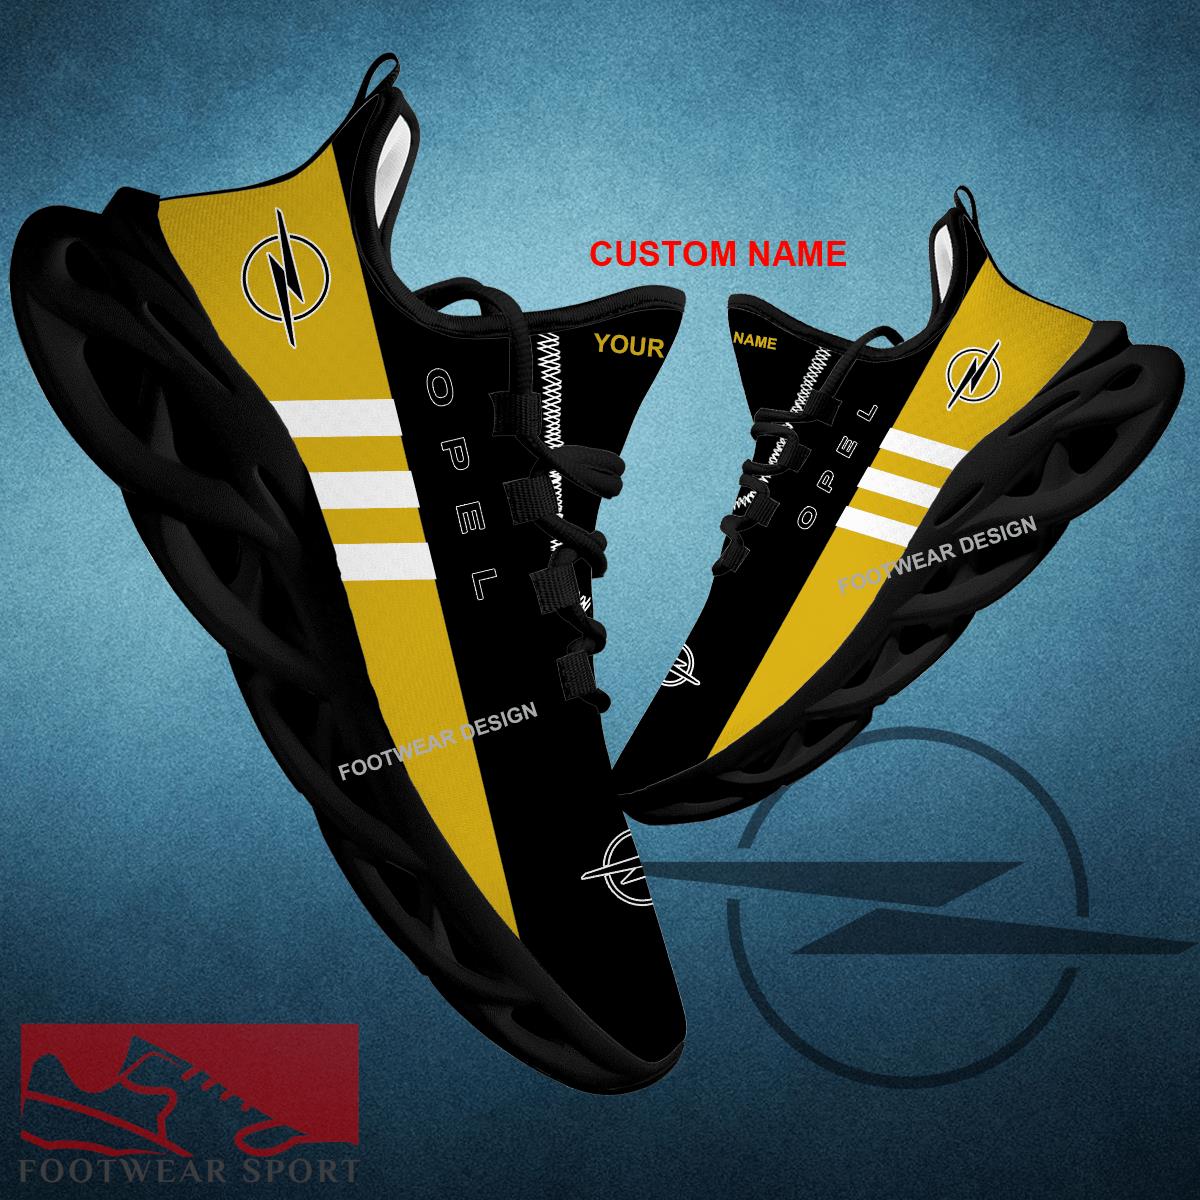 Car Racing Opel Style Chunky Shoes New Design Gift Fans Max Soul Sneakers Personalized - Car Racing Opel Logo New Style Chunky Shoes Photo 1